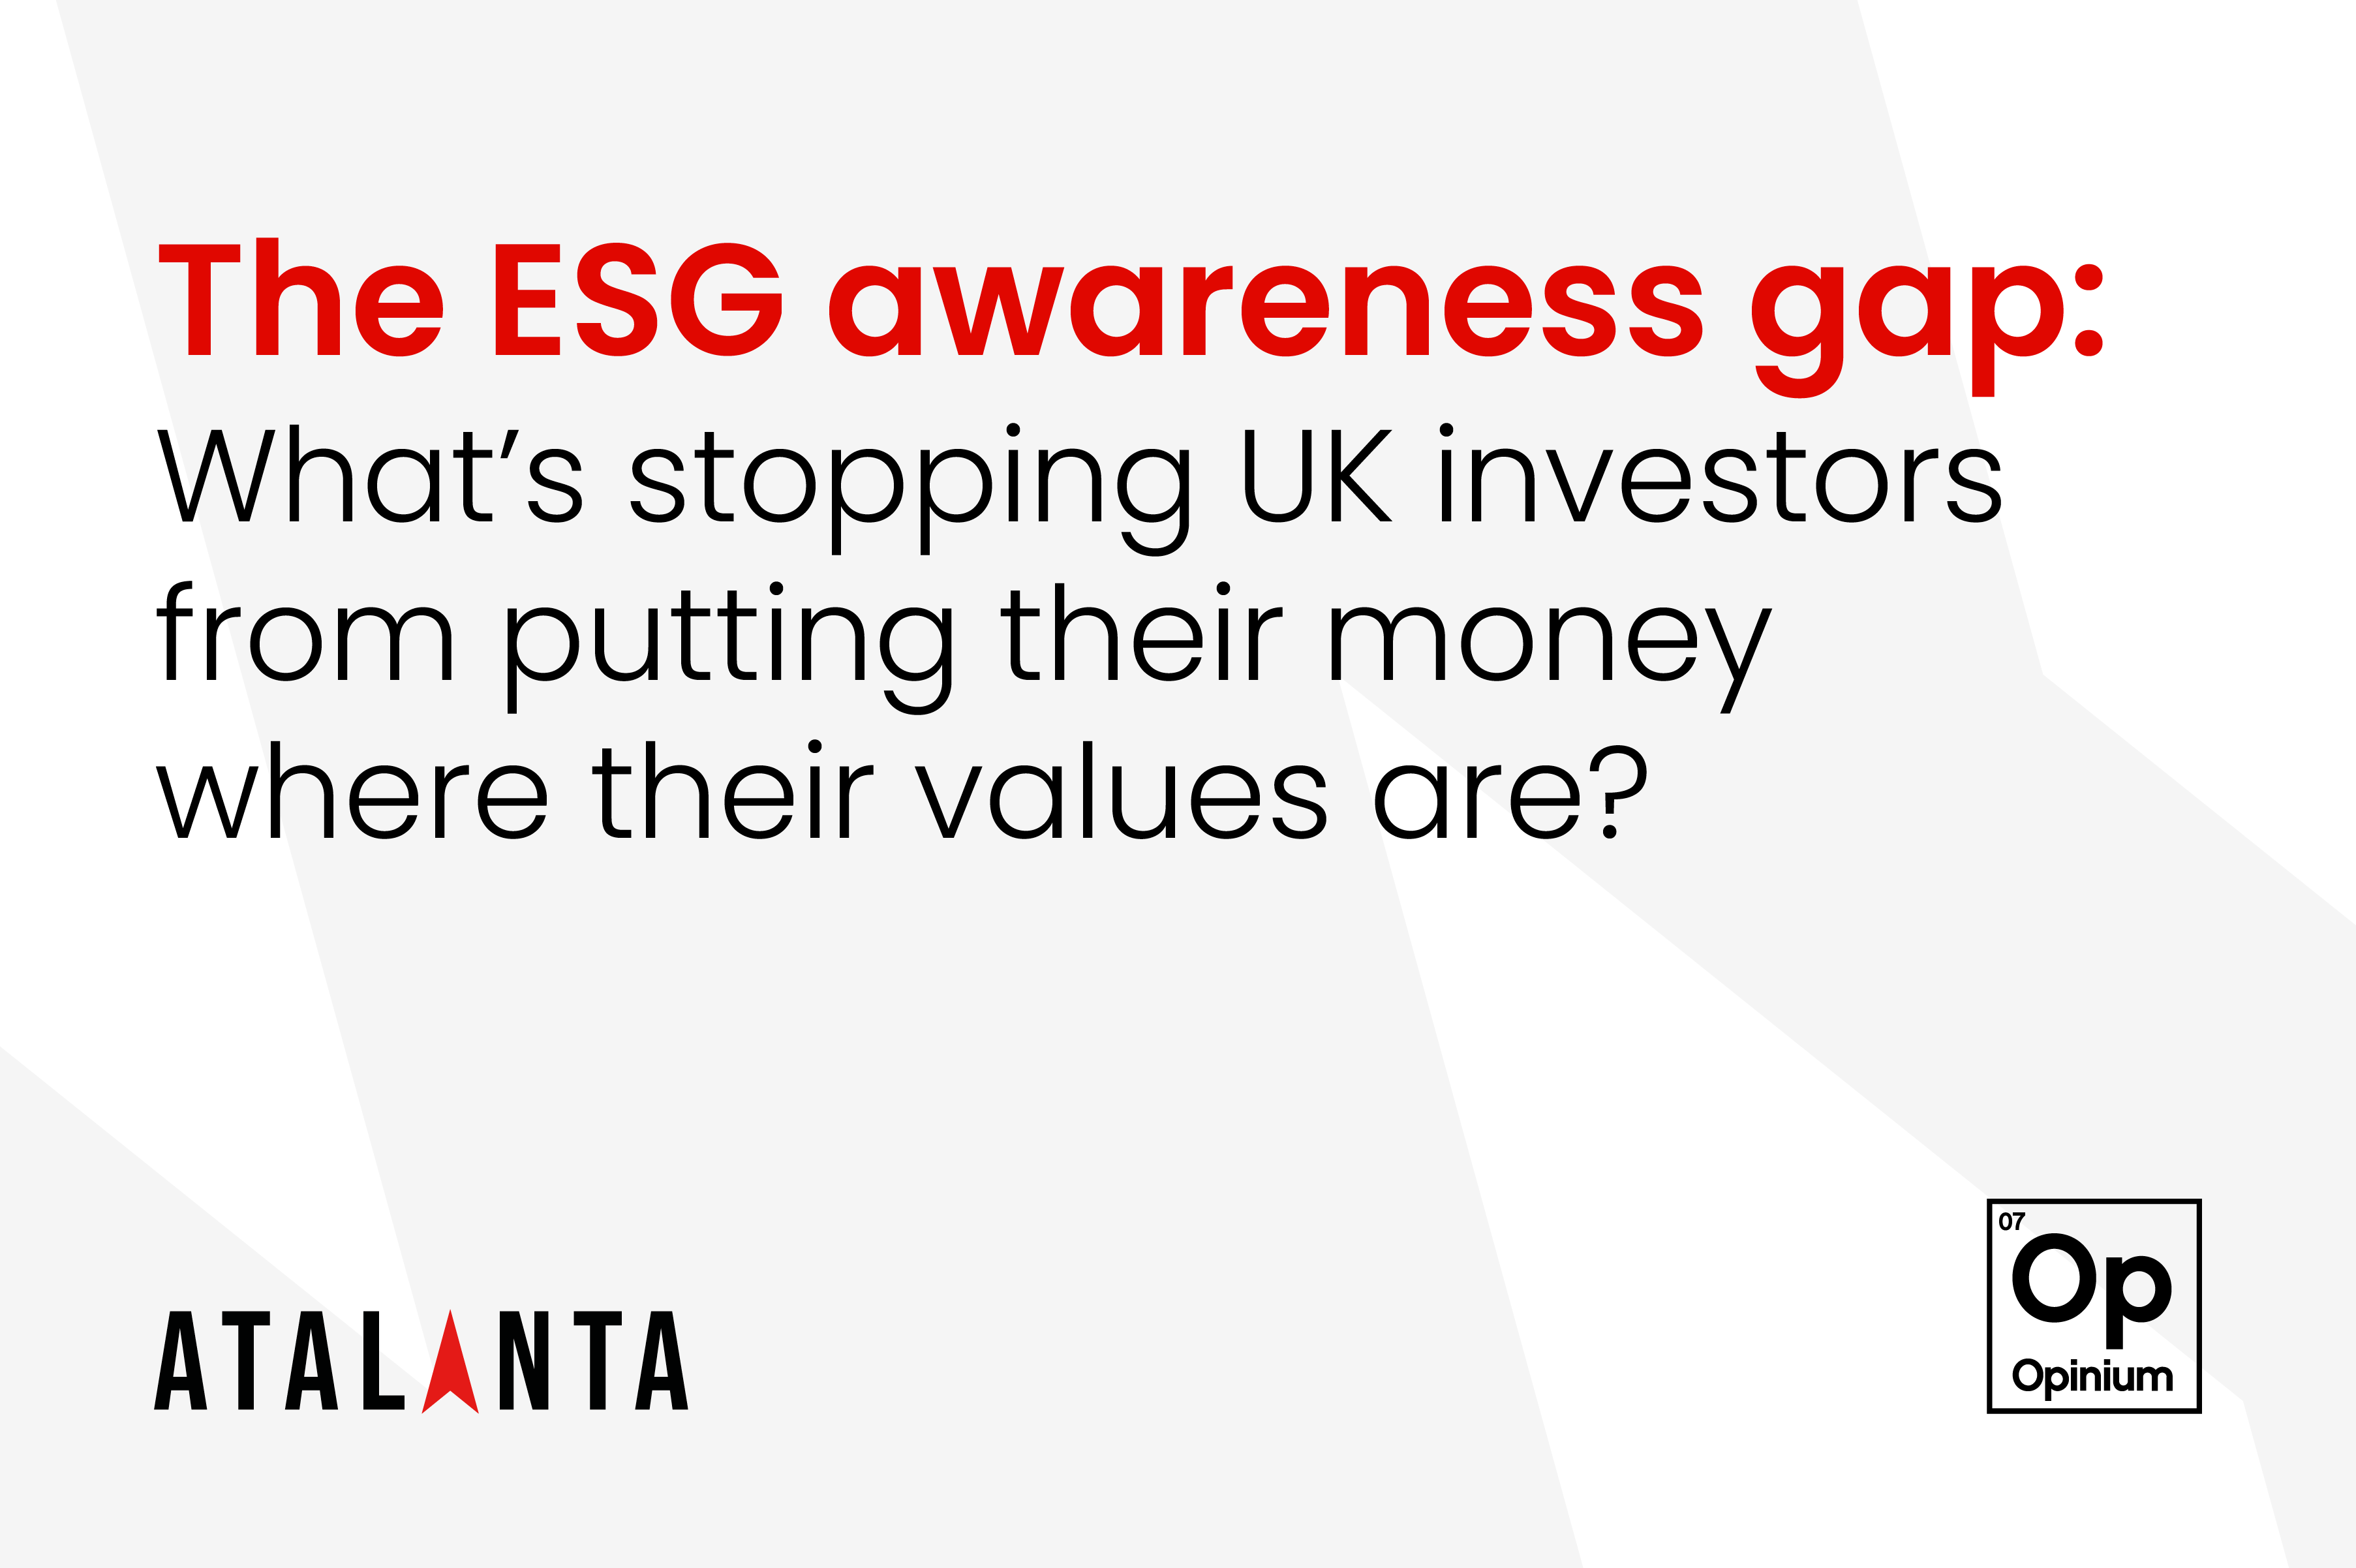 The ESG awareness gap: What’s stopping UK investors from putting their money where their values are?